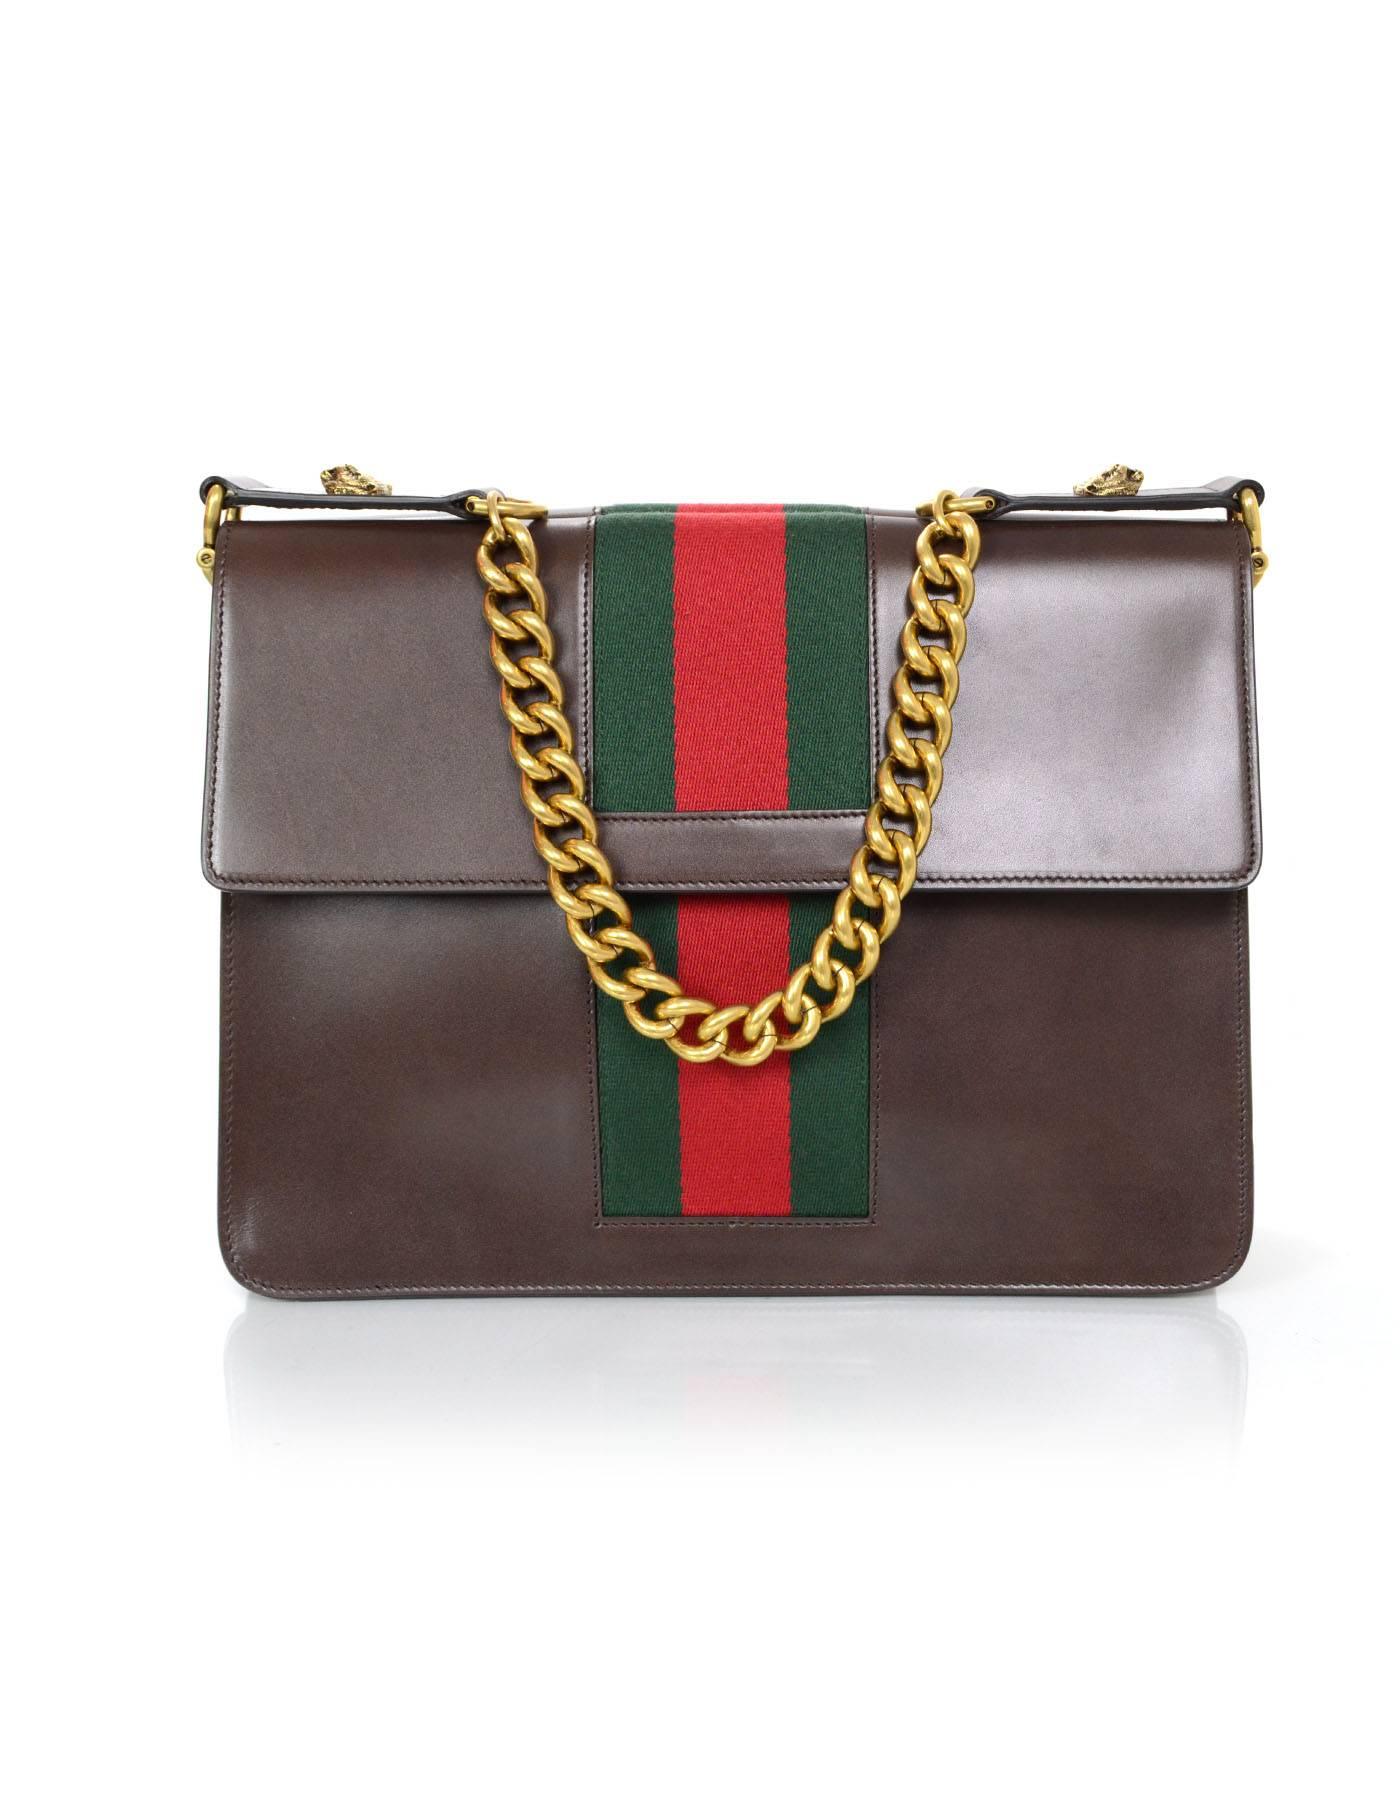 Black Gucci 2016 Brown Leather Marmont Shoulder Bag w/ Green & Red Stripe